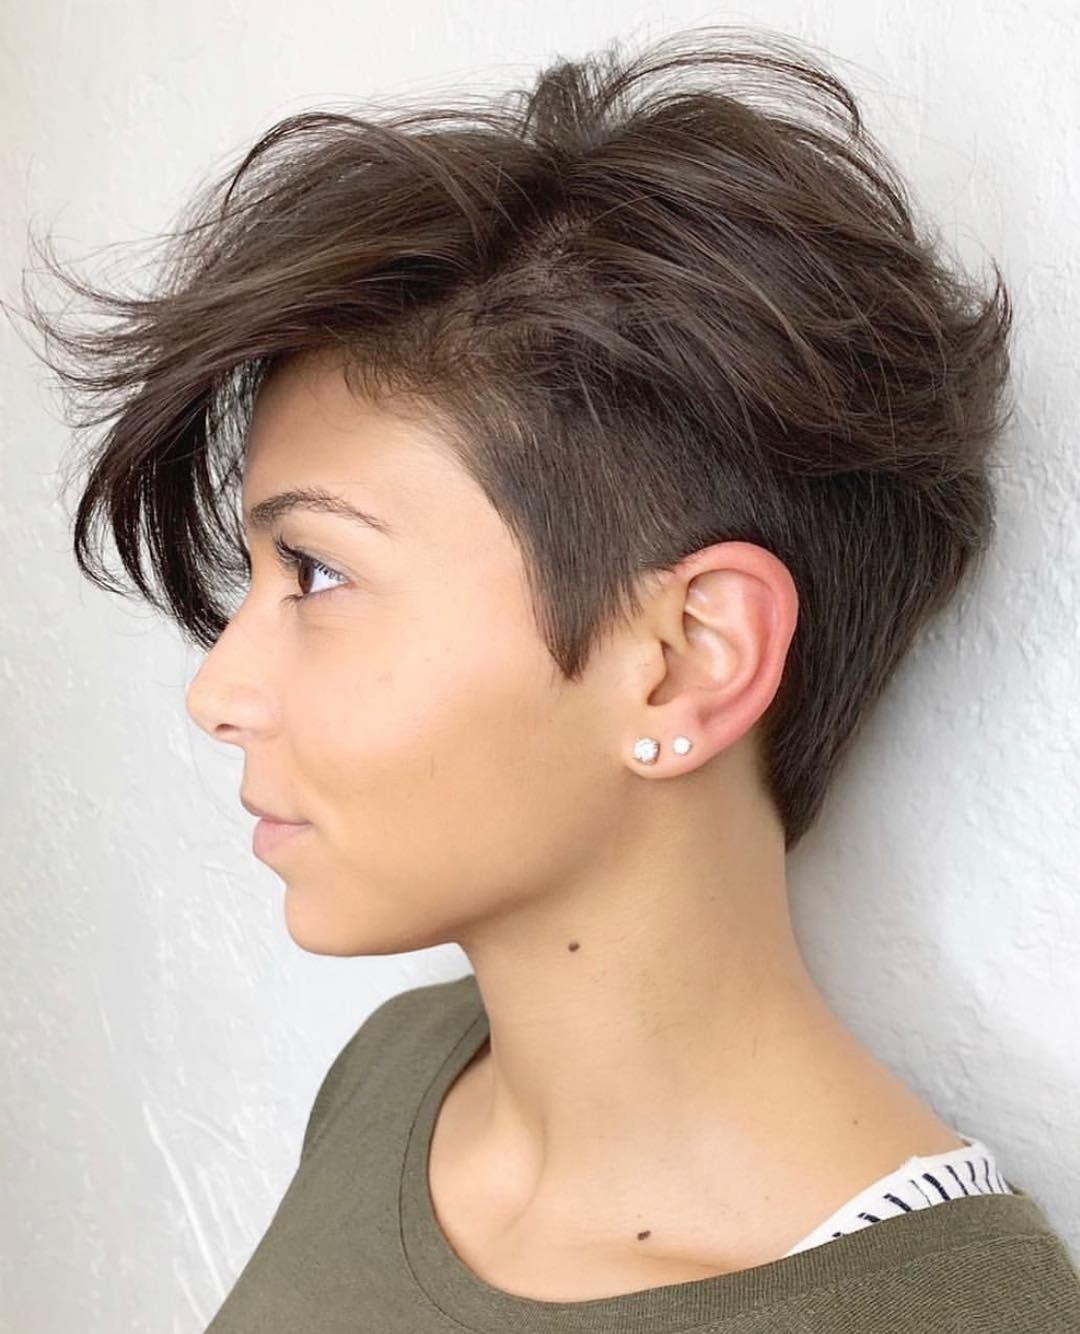 how to metal short hair style - wavy haircut